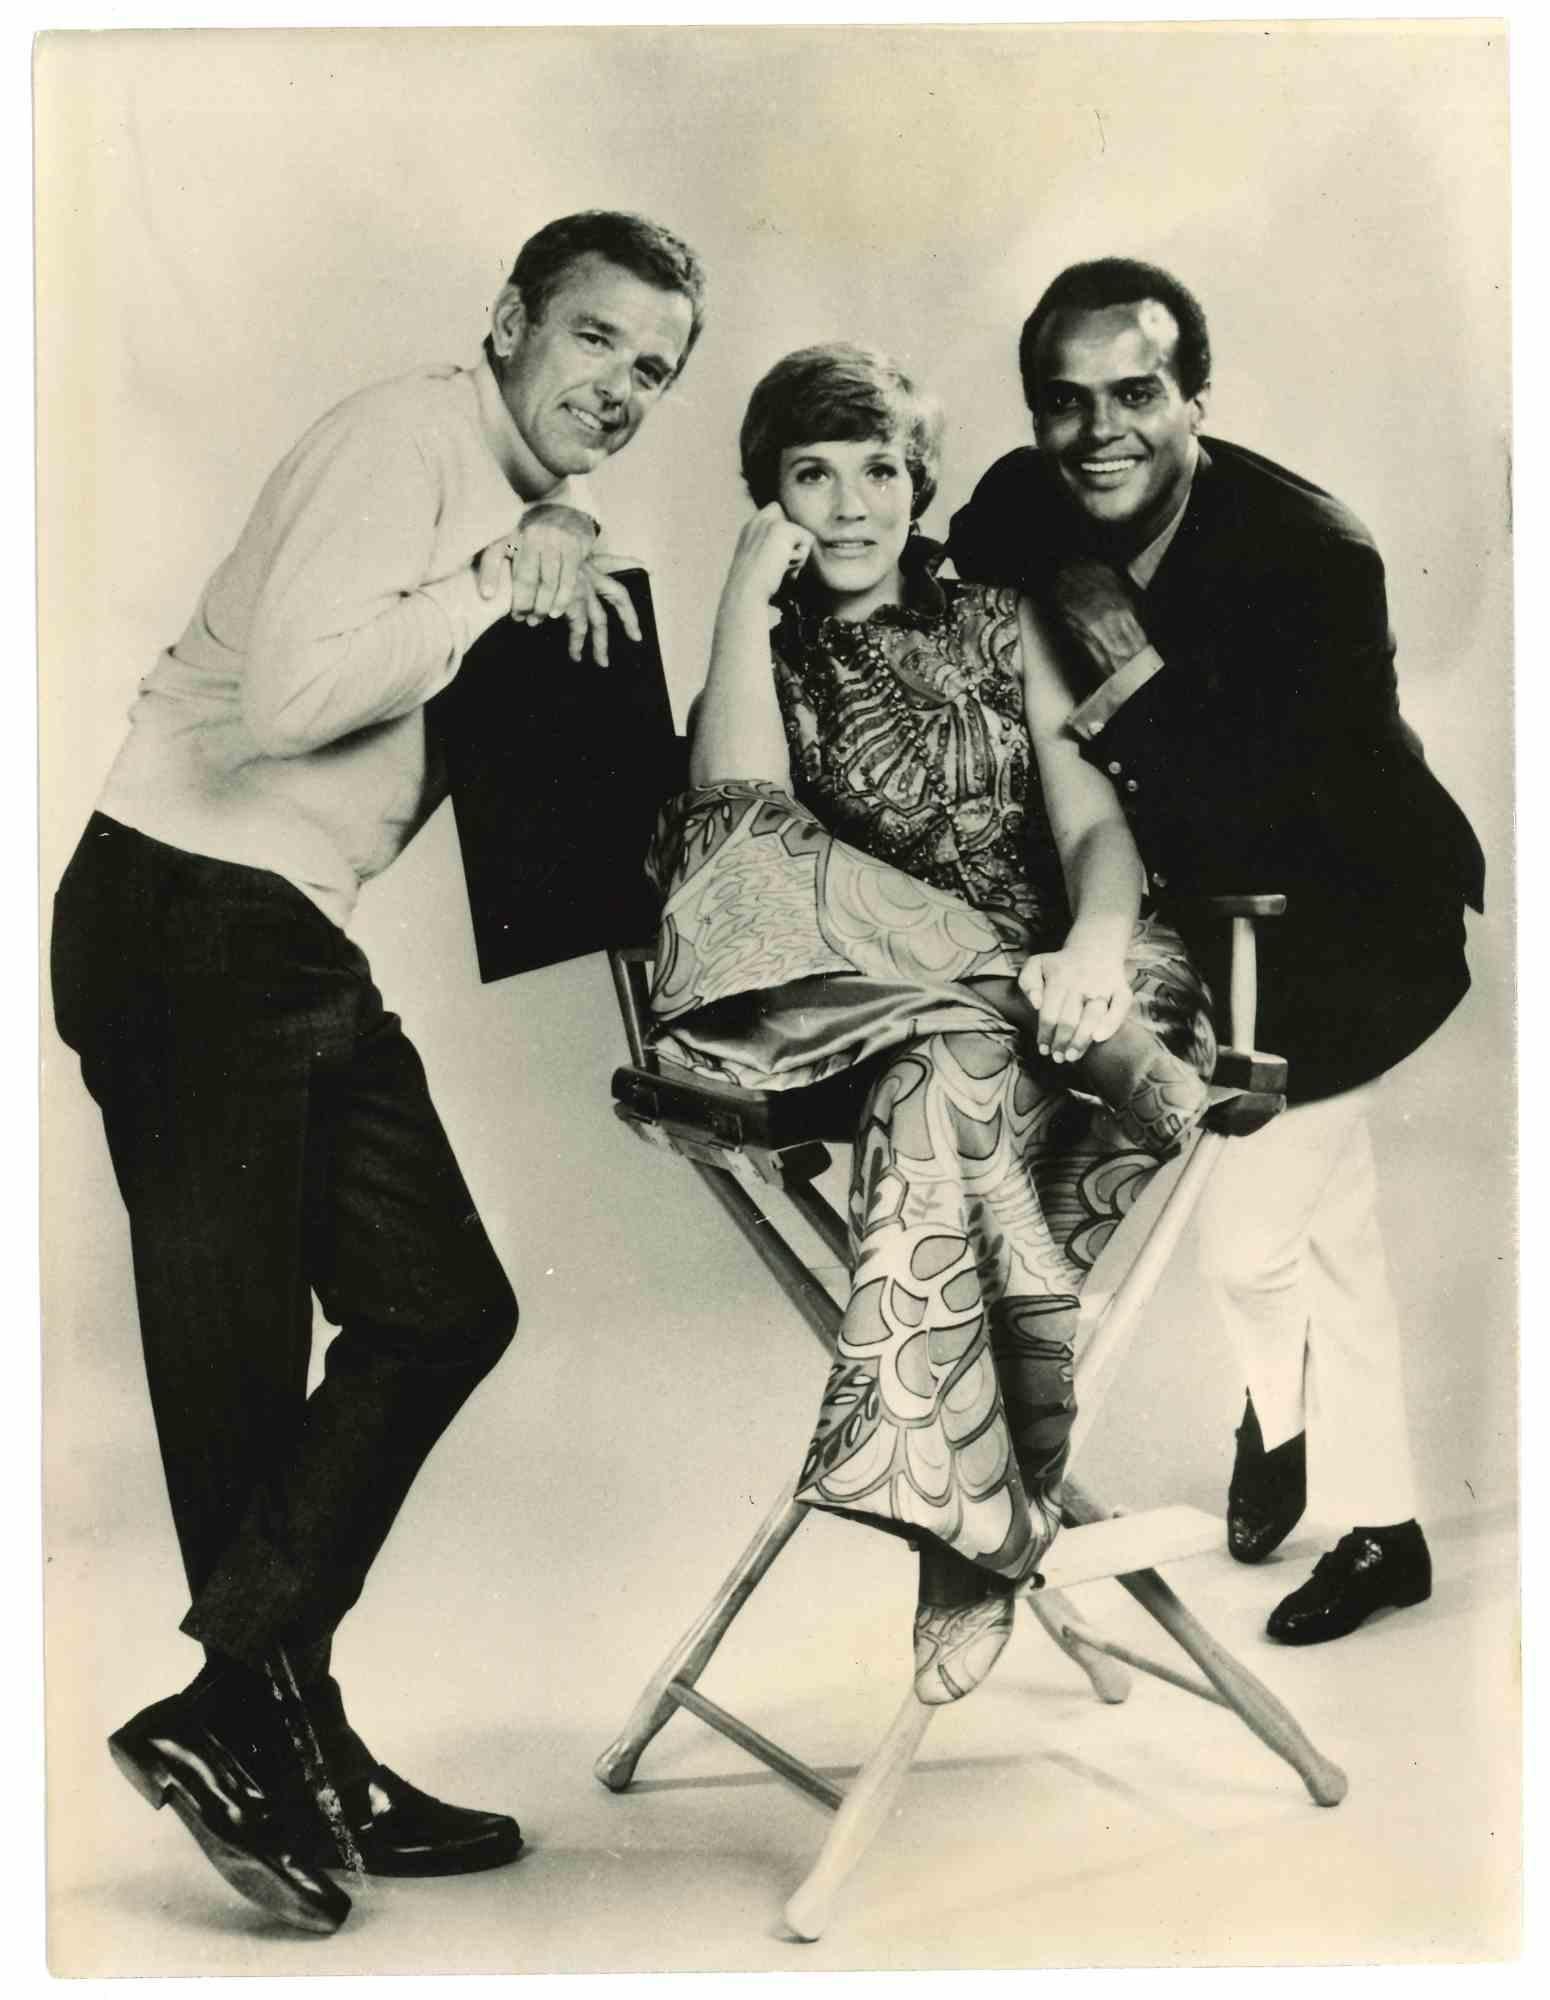 Unknown Black and White Photograph - Gewer Champion, Julie Andrews and Harry Belafonte - Vintage Photo  - 1960s